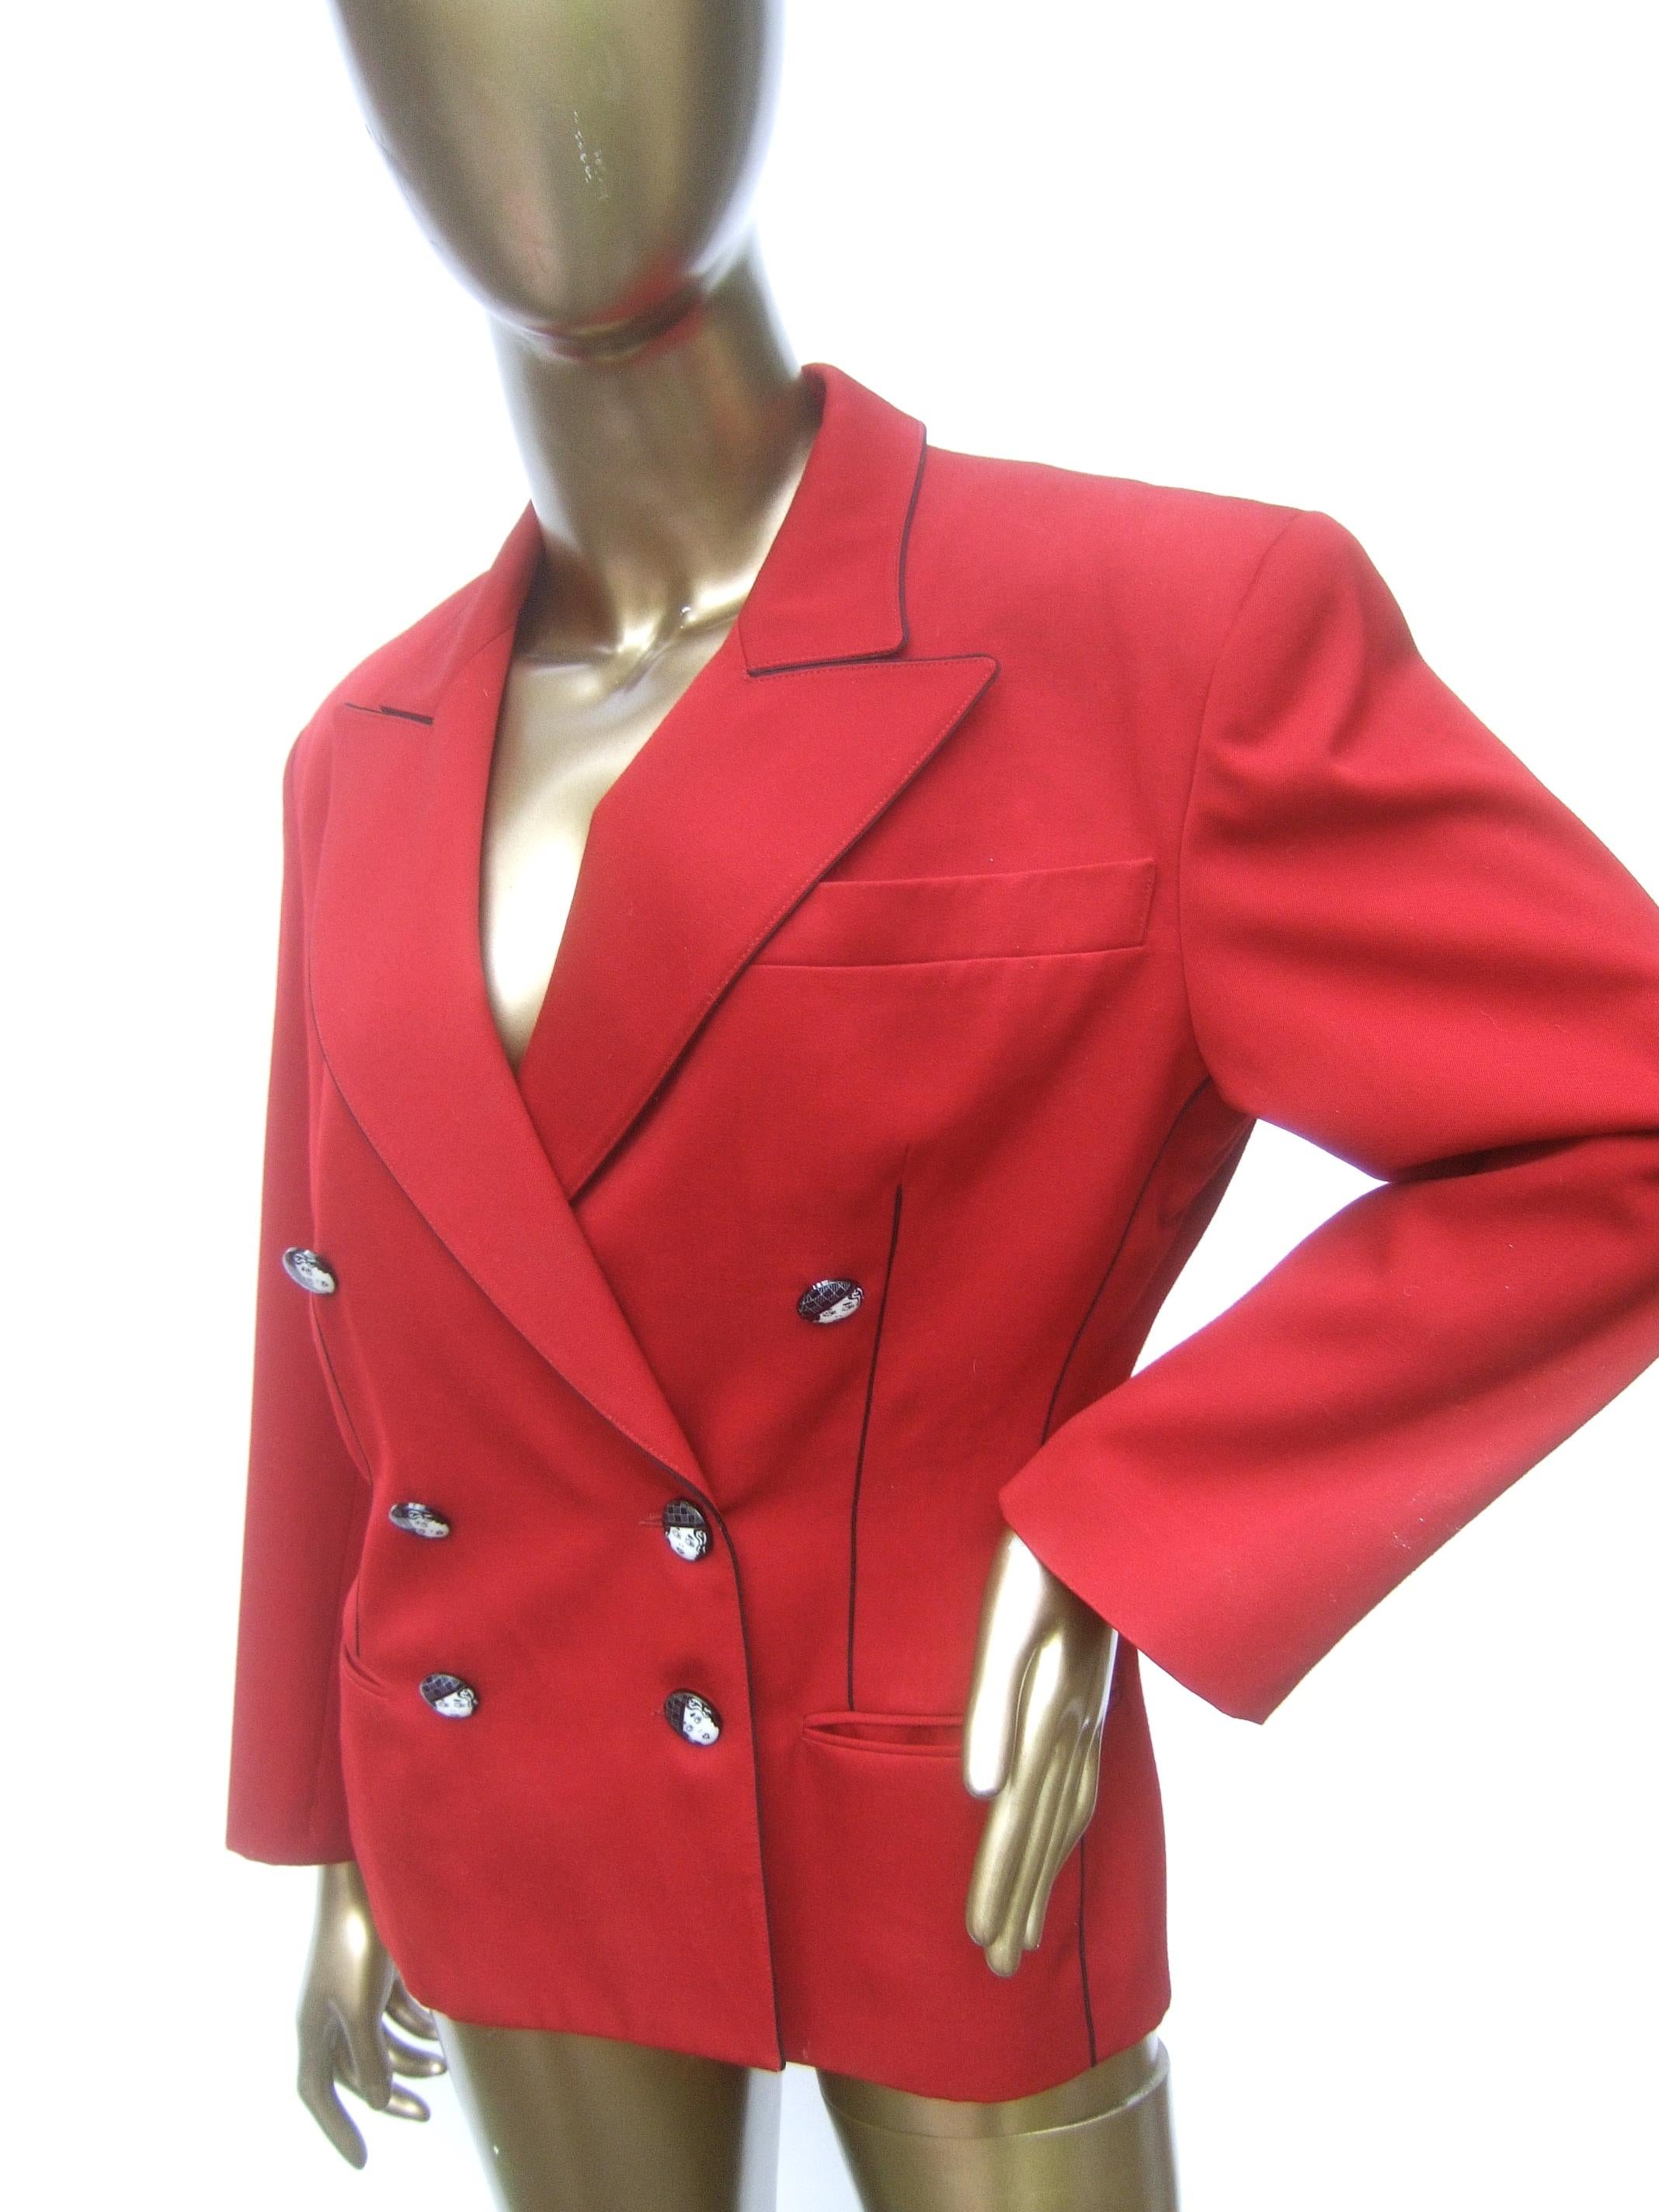 Lolita Lempicka Paris Red Wool Face Button Double-Breasted Blazer c 1980s For Sale 3